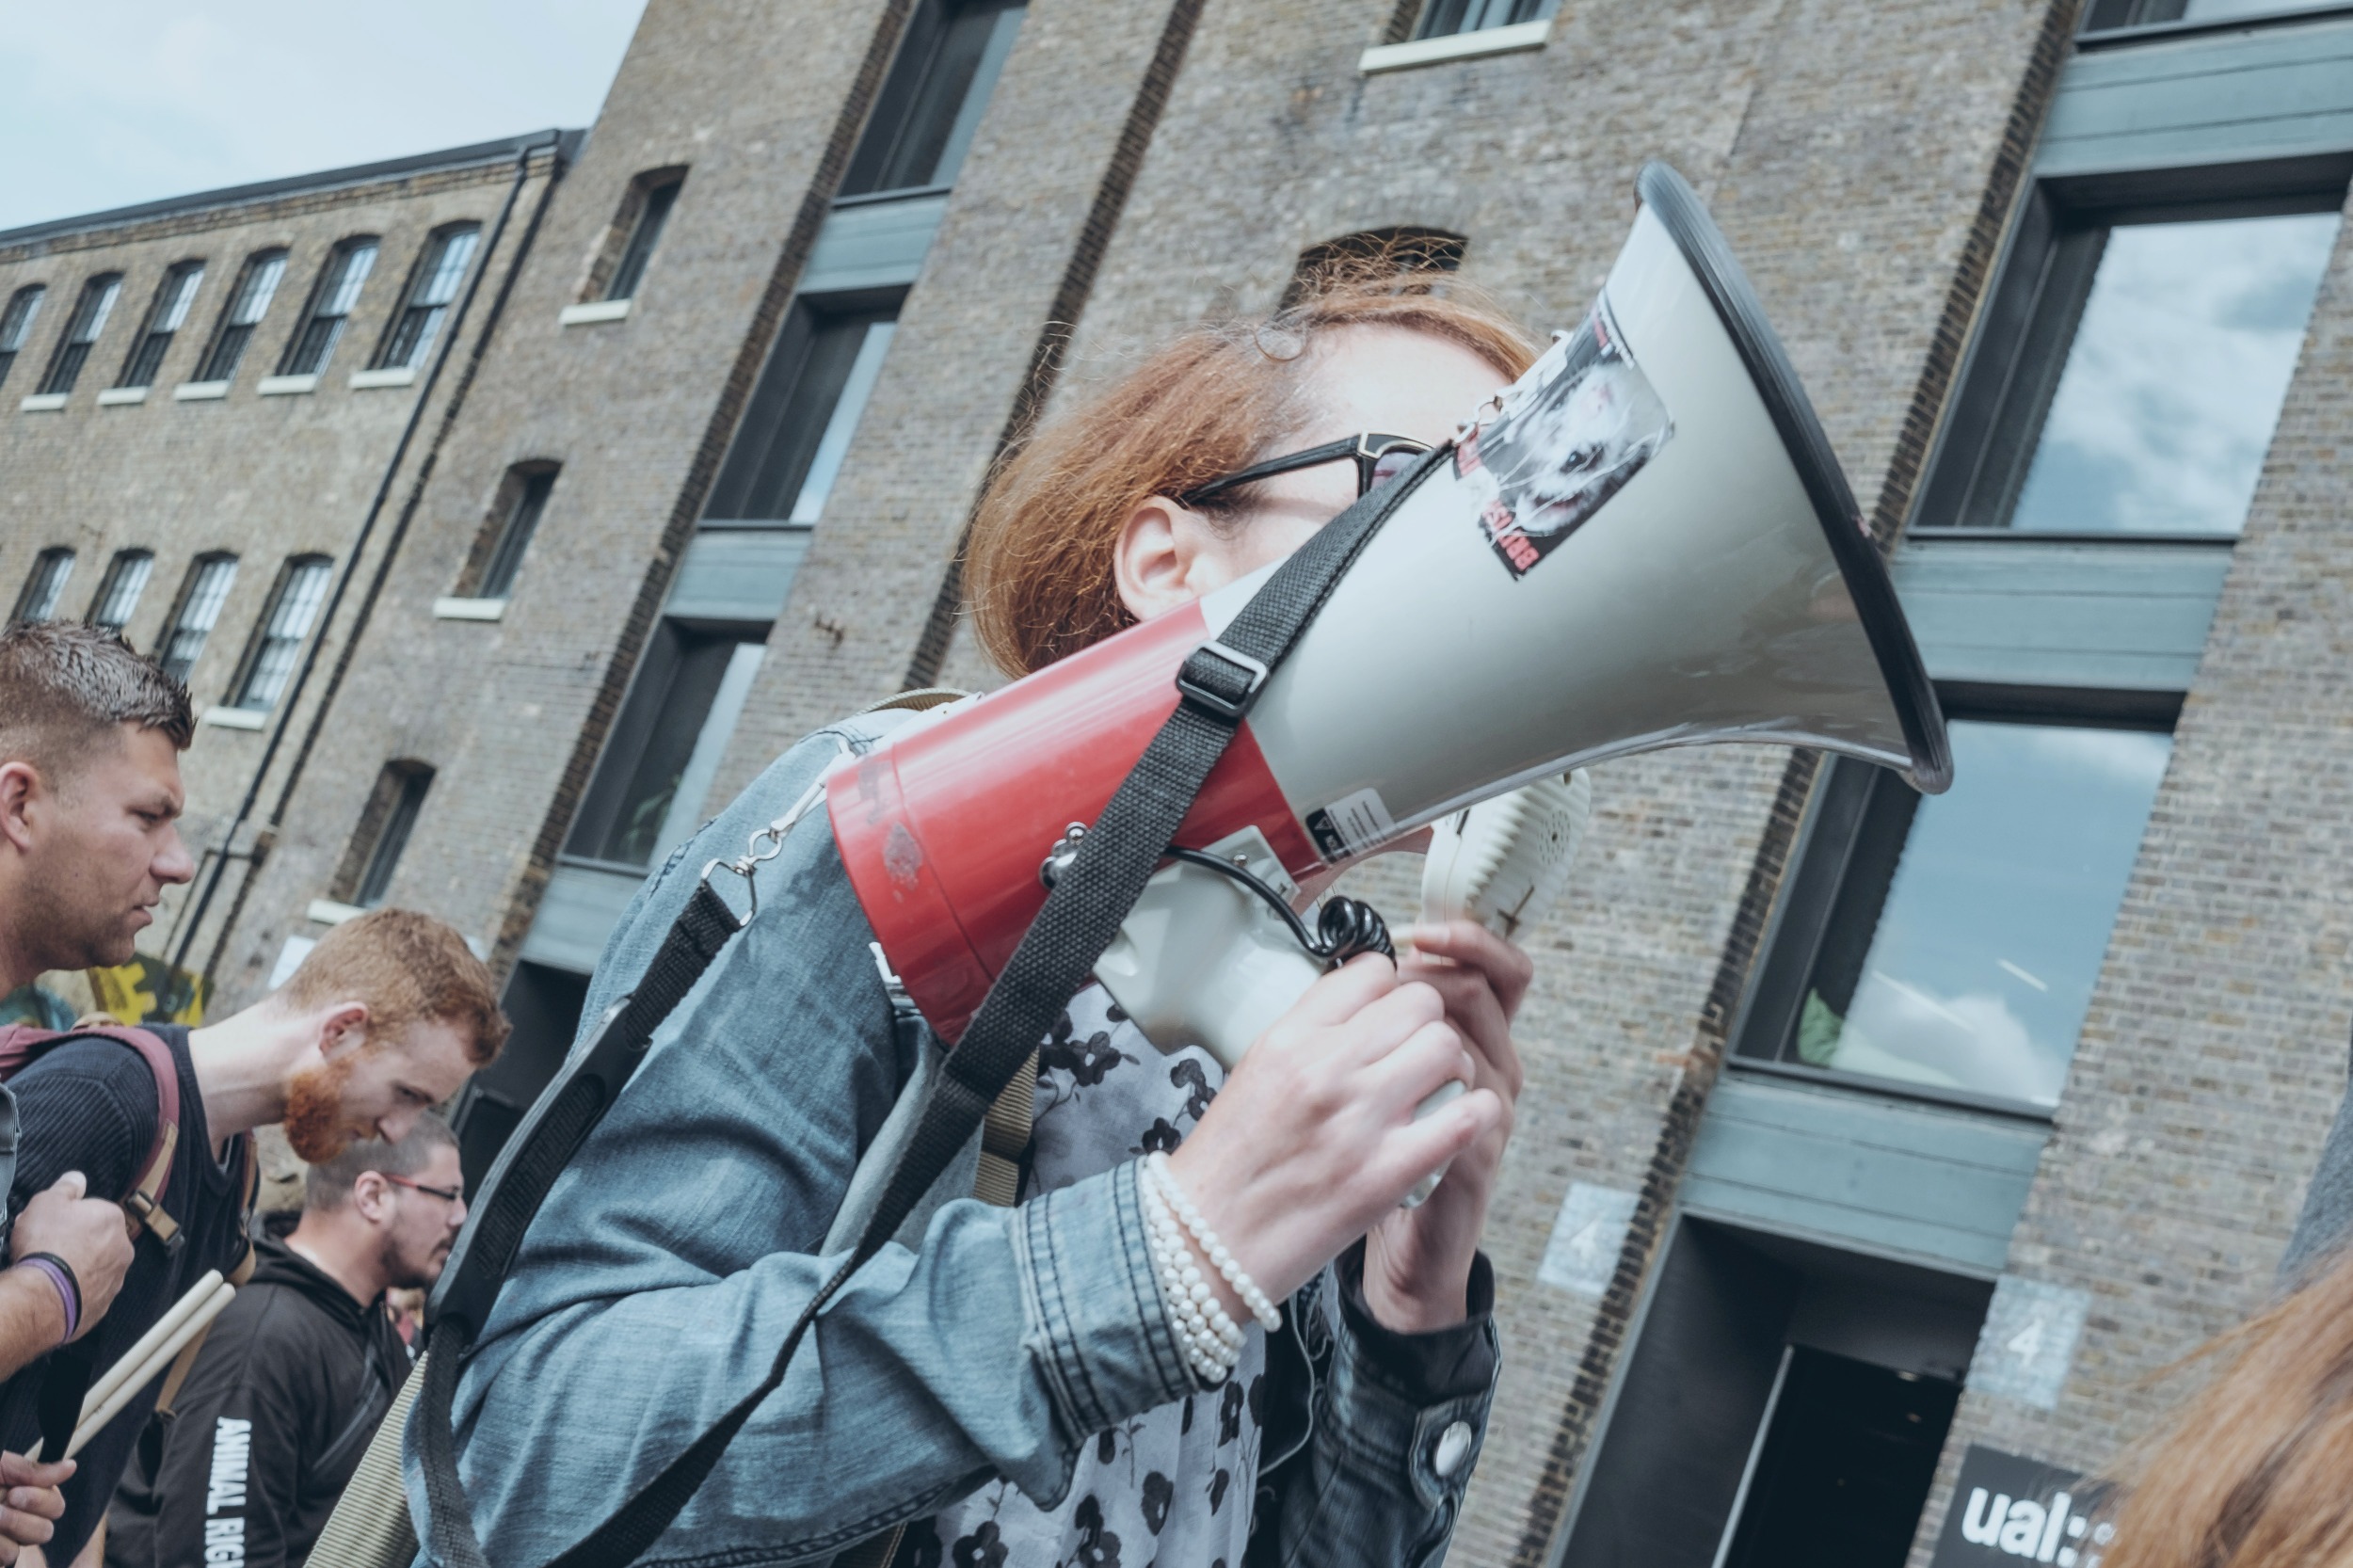 A protestor hold a megaphone up at a demonstration outside a building